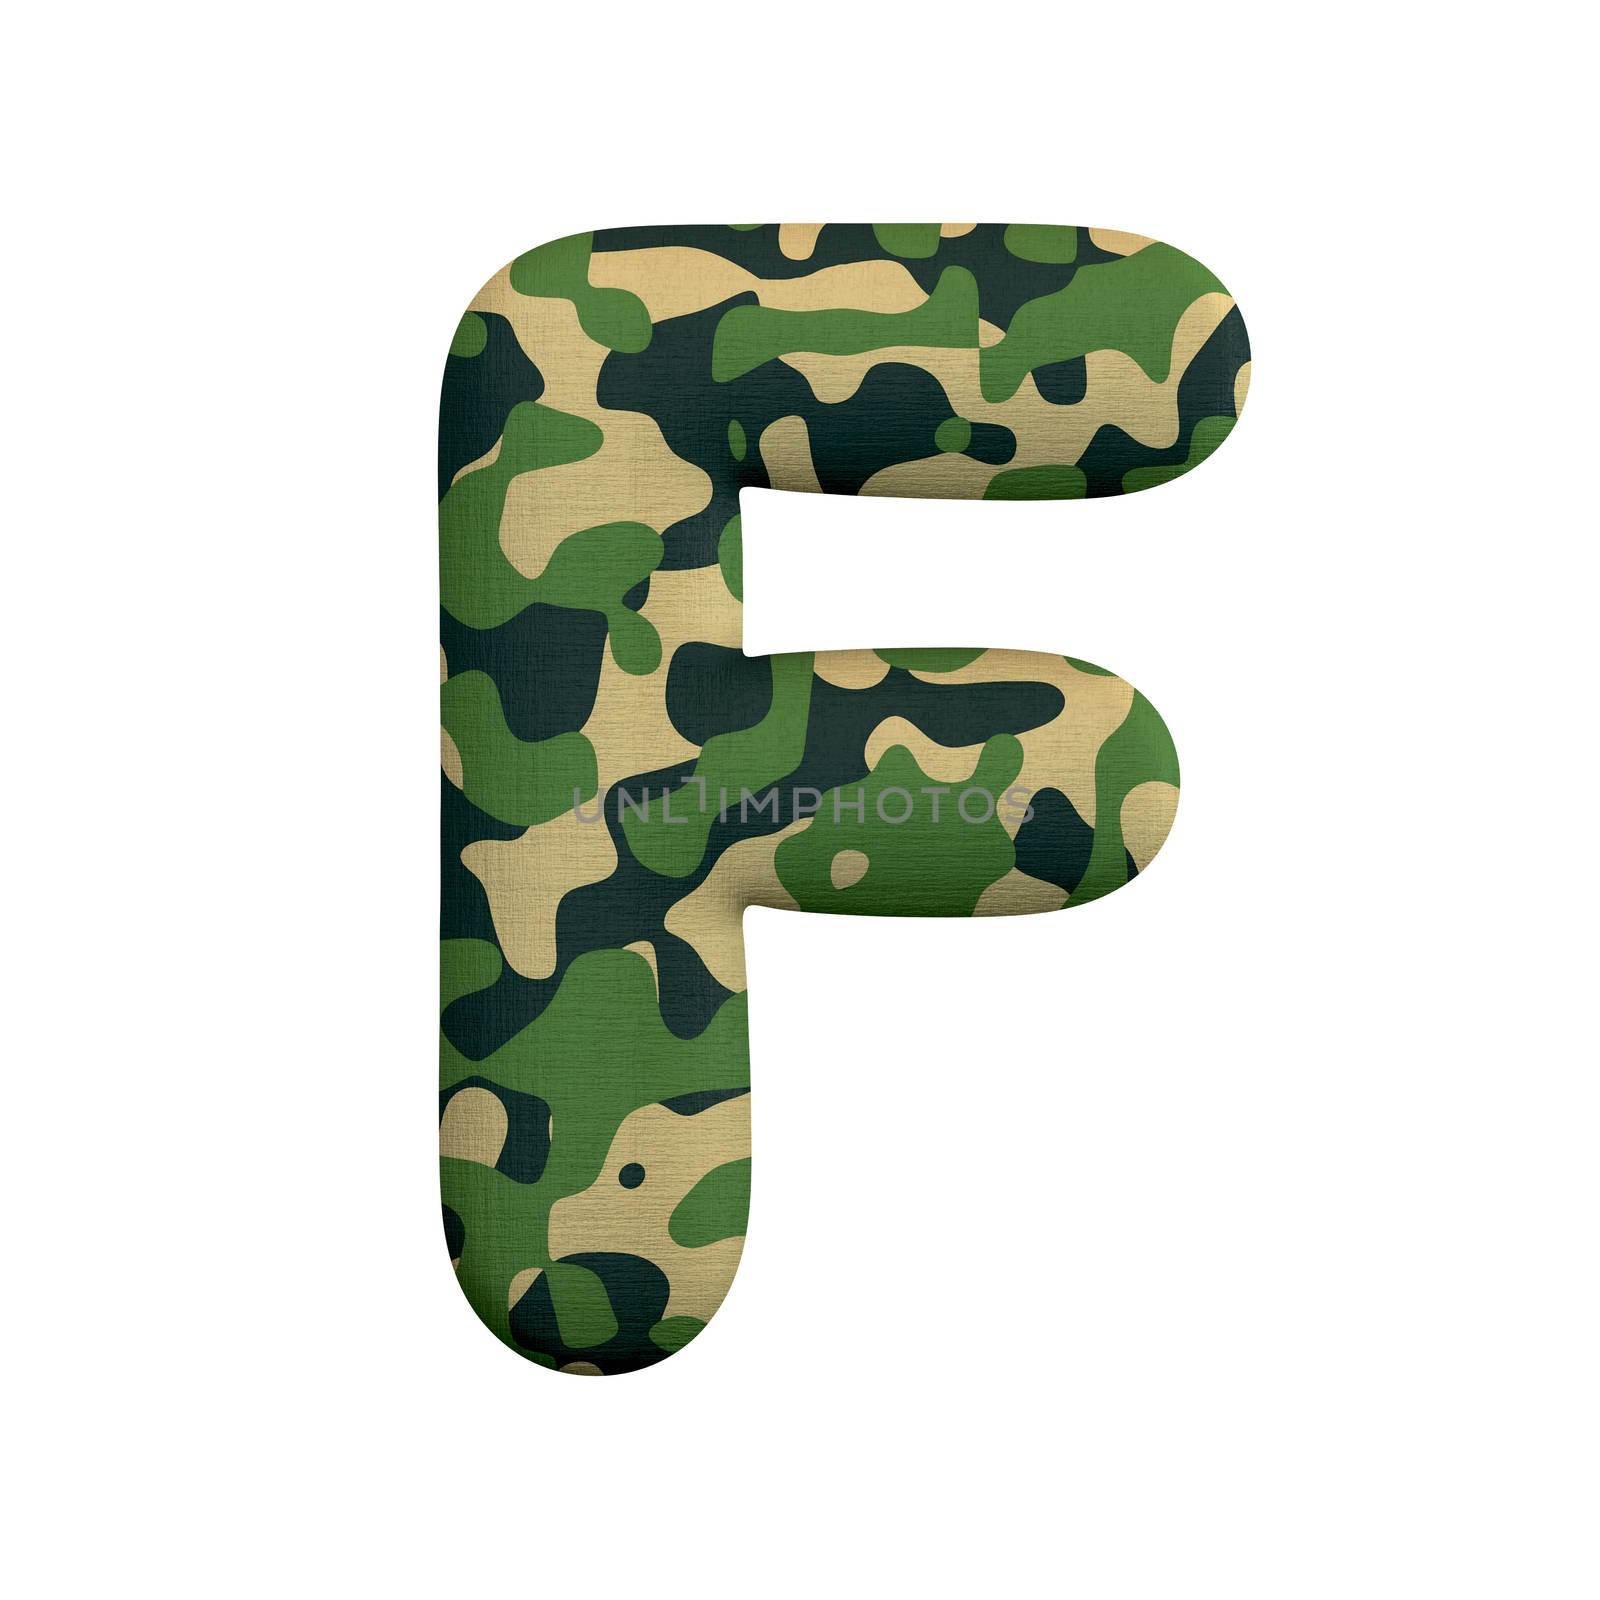 Army letter F - Capital 3d Camo font isolated on white background. This alphabet is perfect for creative illustrations related but not limited to Army, war, survivalism...